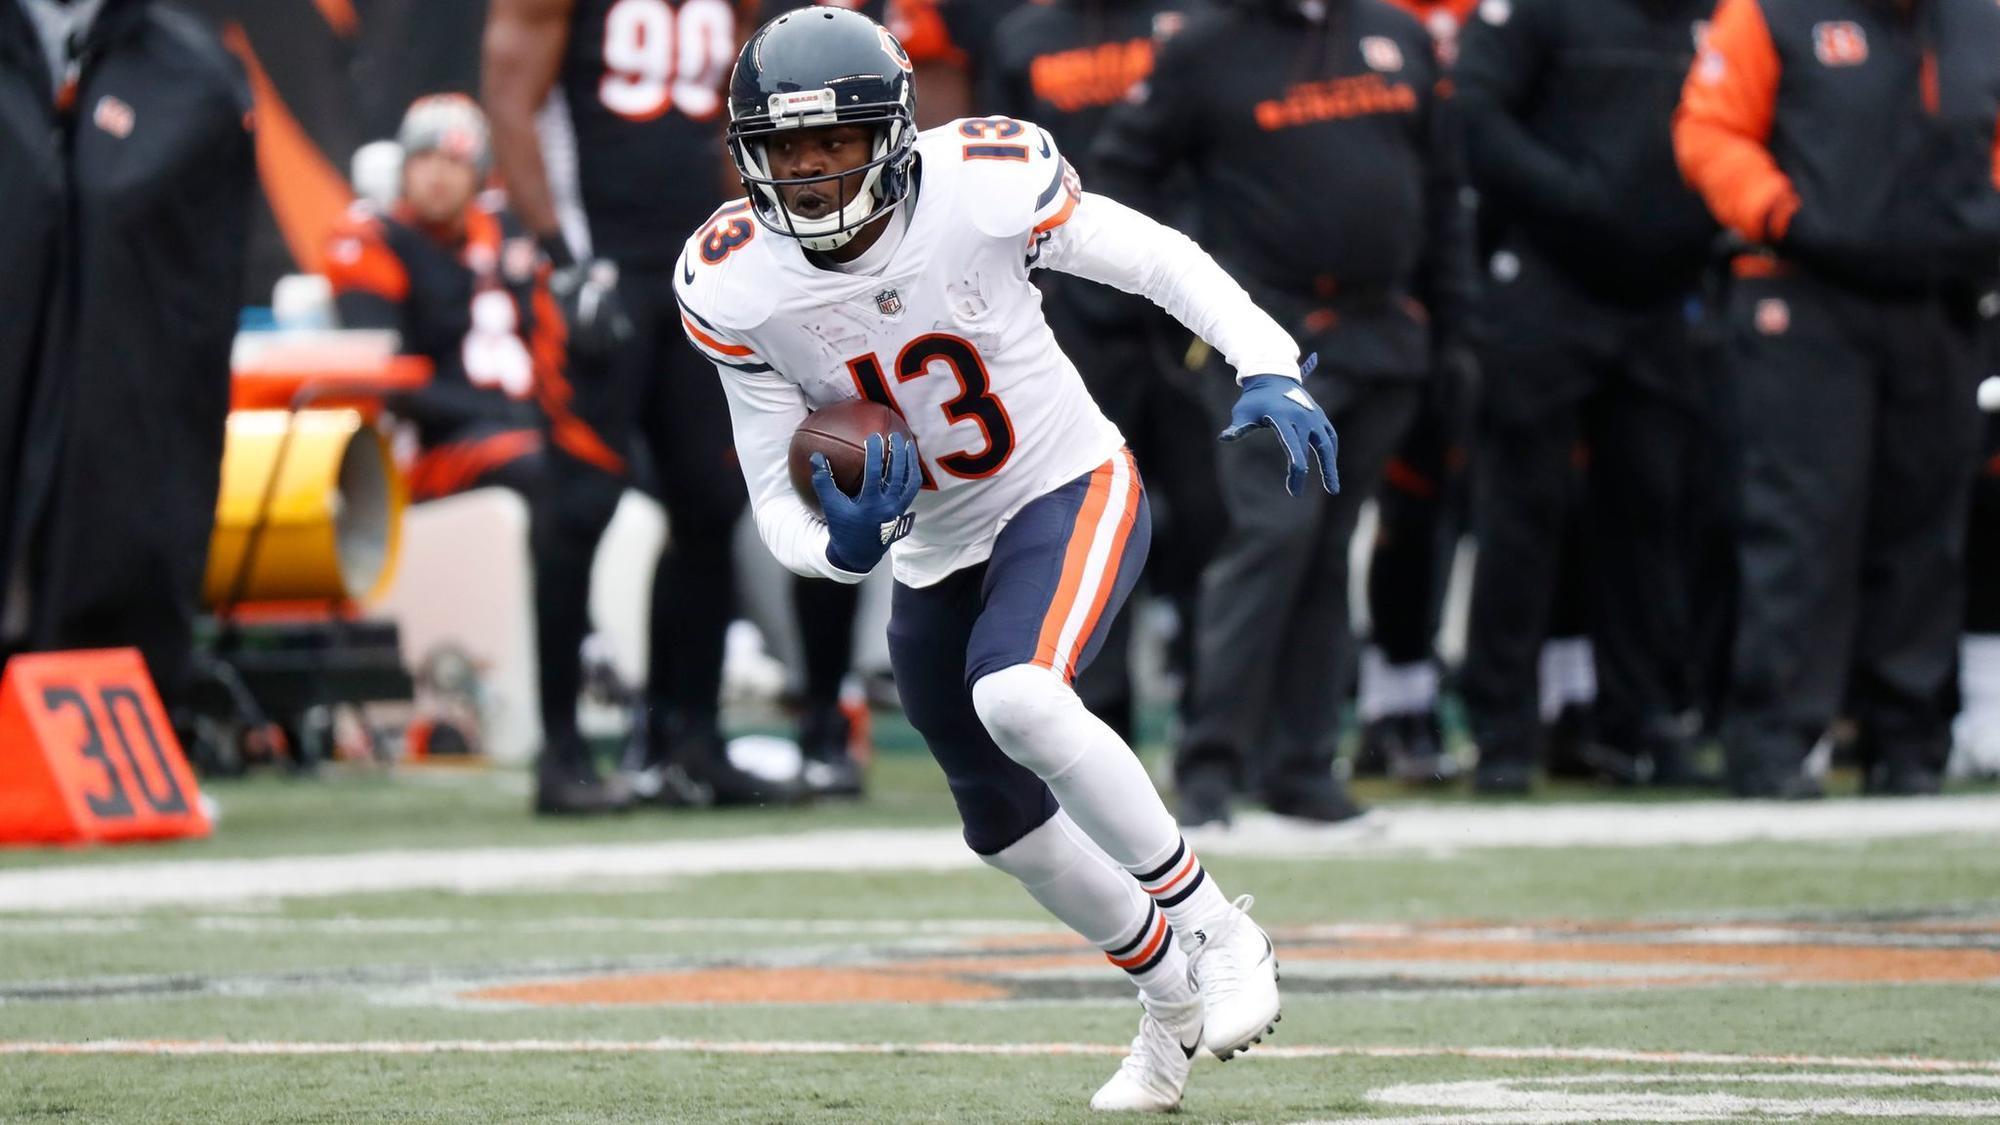 Kendall Wright: Bears need more targets, not new receivers - Chicago Tribune